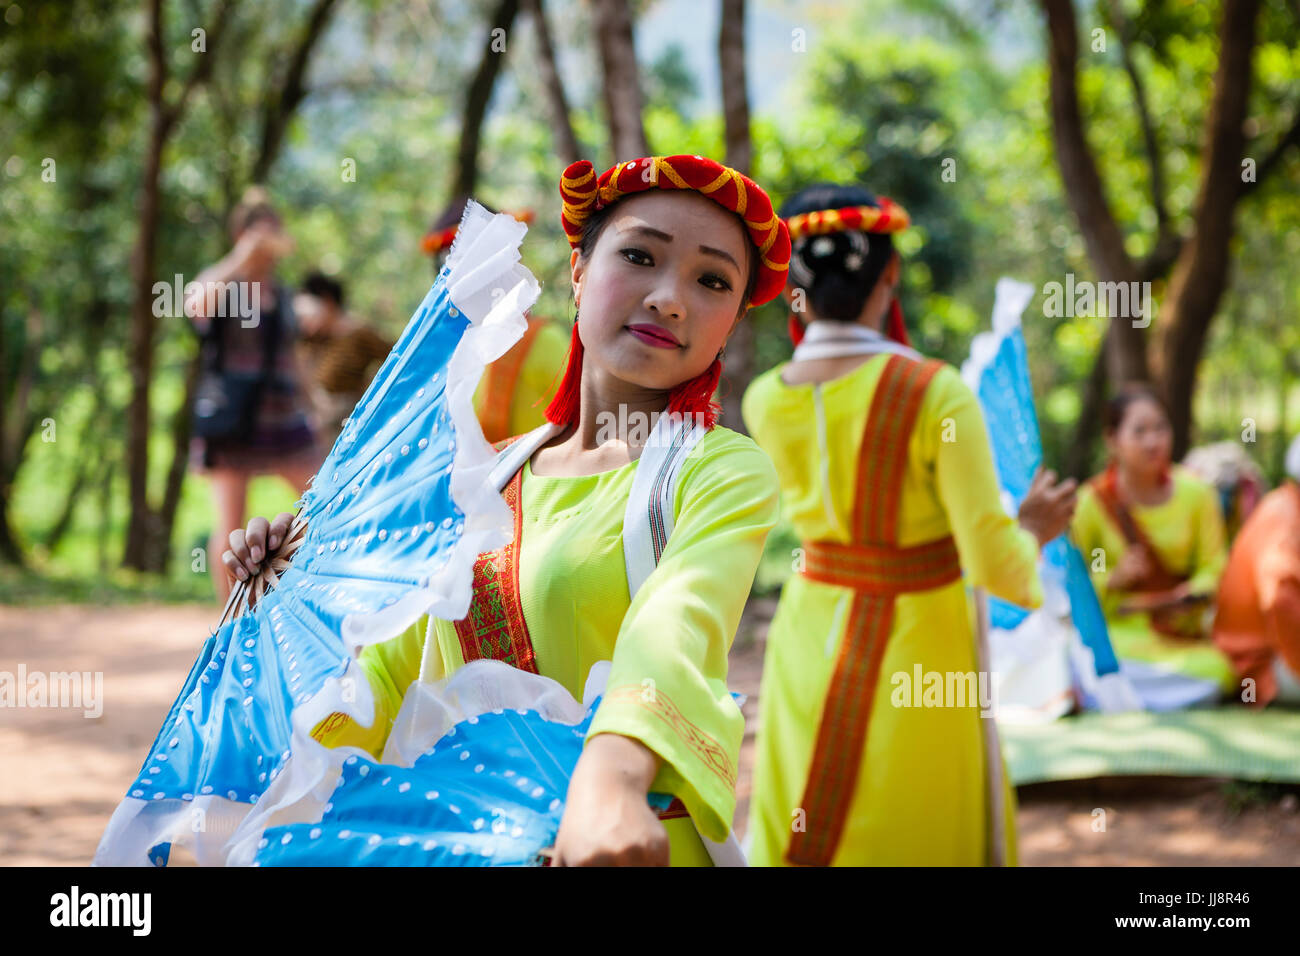 Duy Phu, My Son temple, Vietnam - March 14, 2017: vietnamese traditional dance team performance Stock Photo